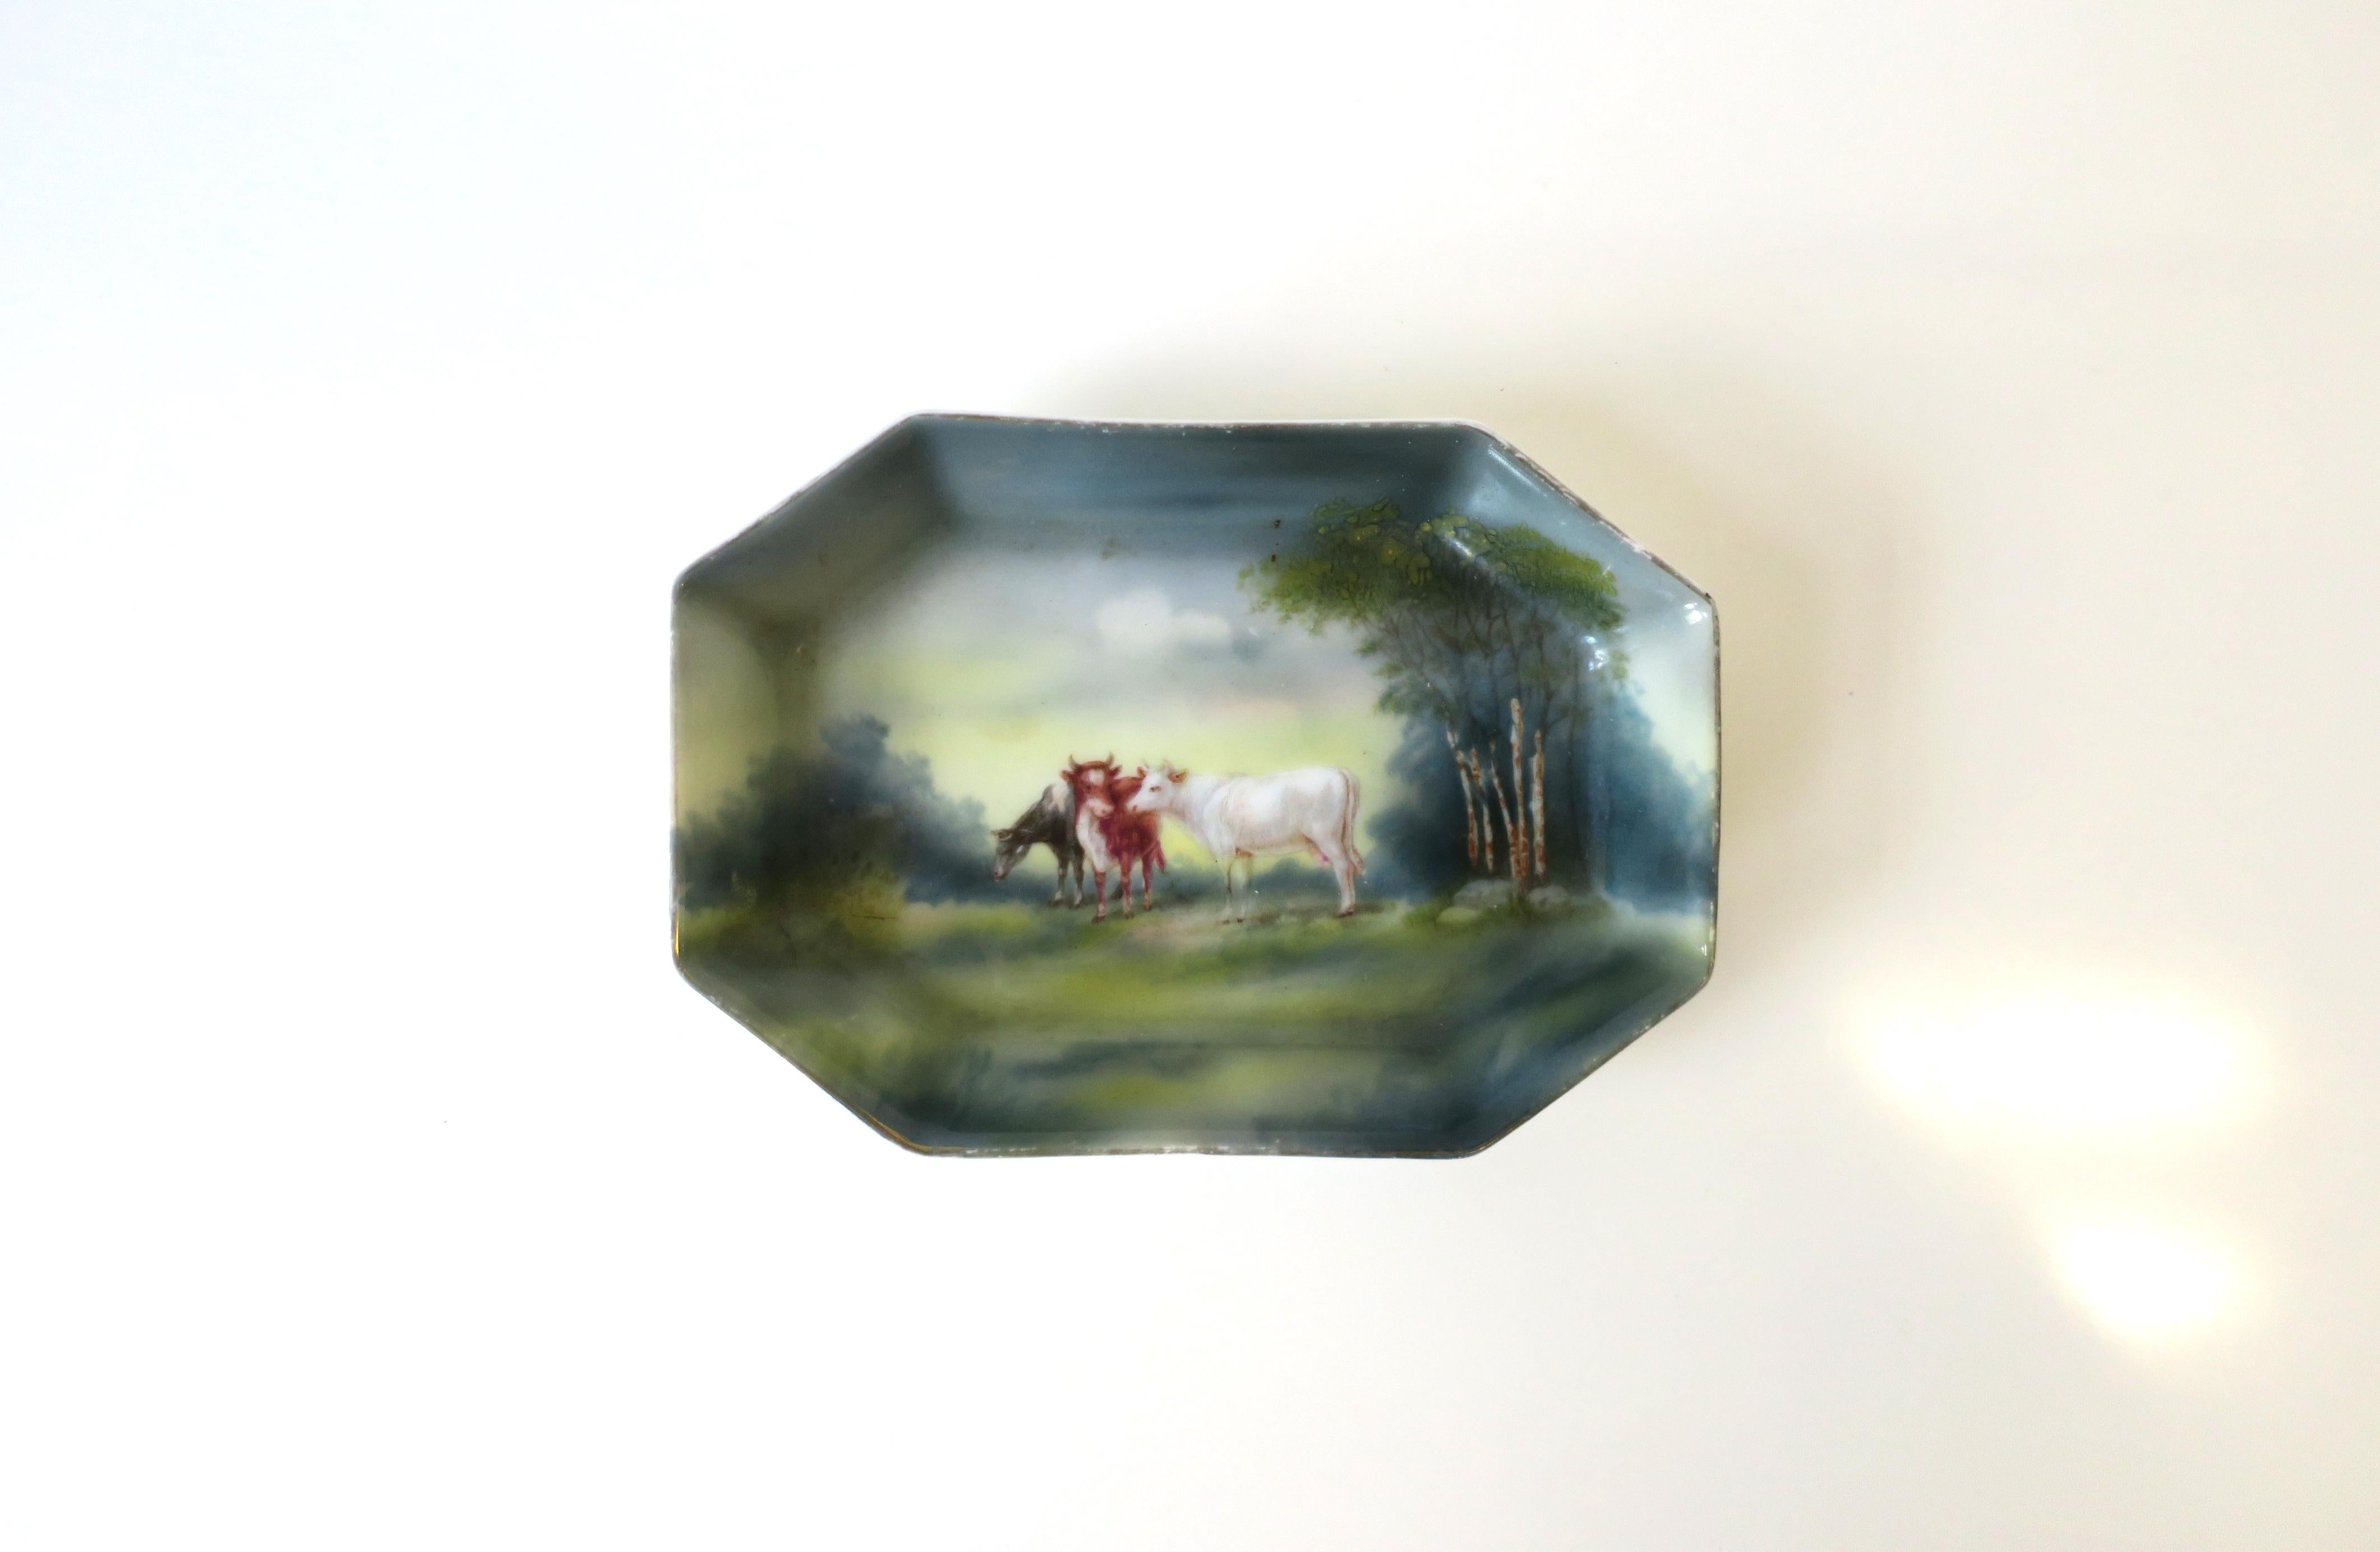 A very beautiful German porcelain jewelry dish with farm scene, circa early-20th century, Germany. Dish is octagonal in shape with luminous rustic landscape farm scene of three bovine cows, grazing, amongst the trees. Great as a standalone piece, or